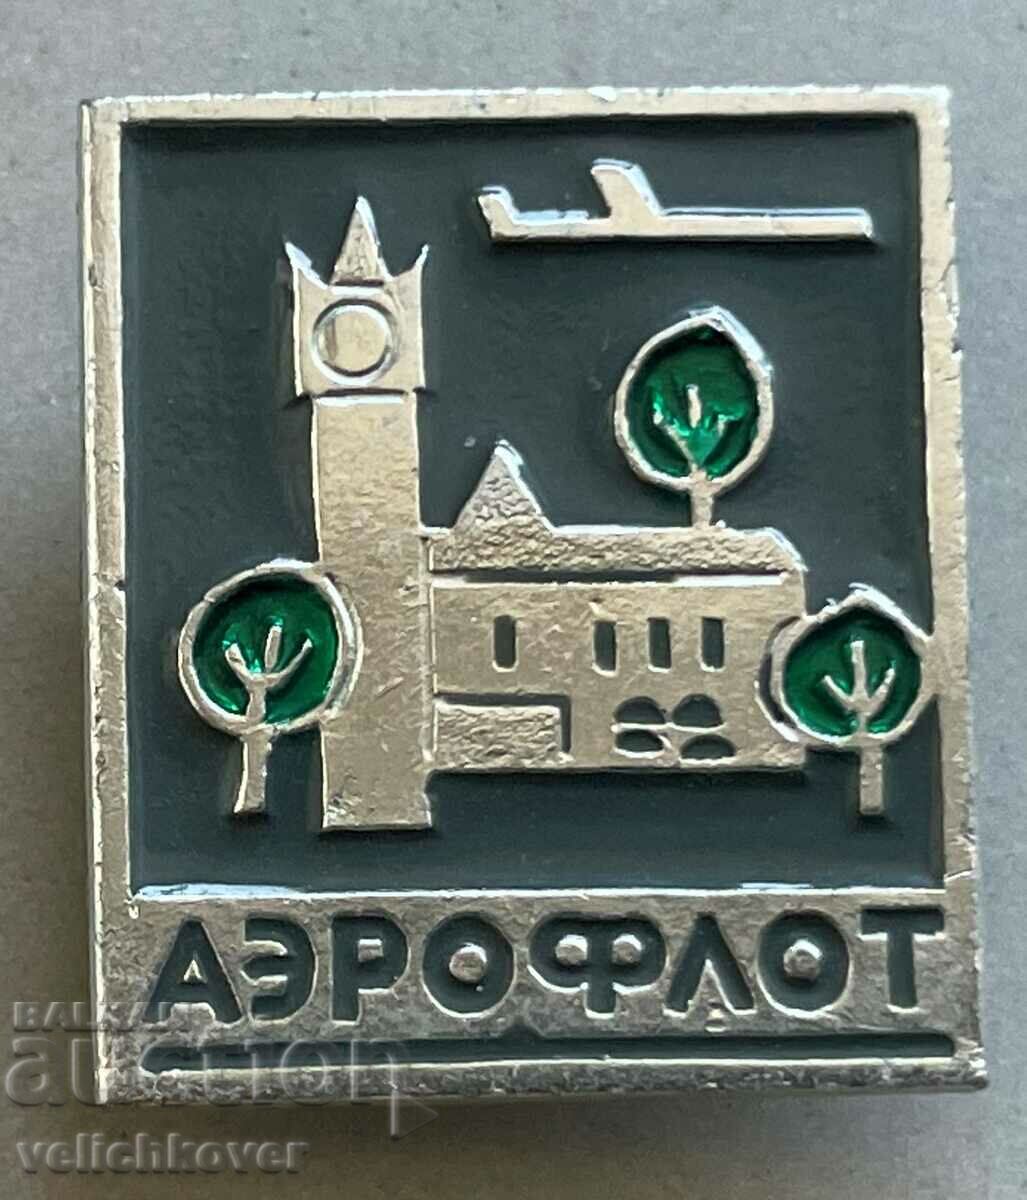 33912 USSR sign airport and airline Aeroflot